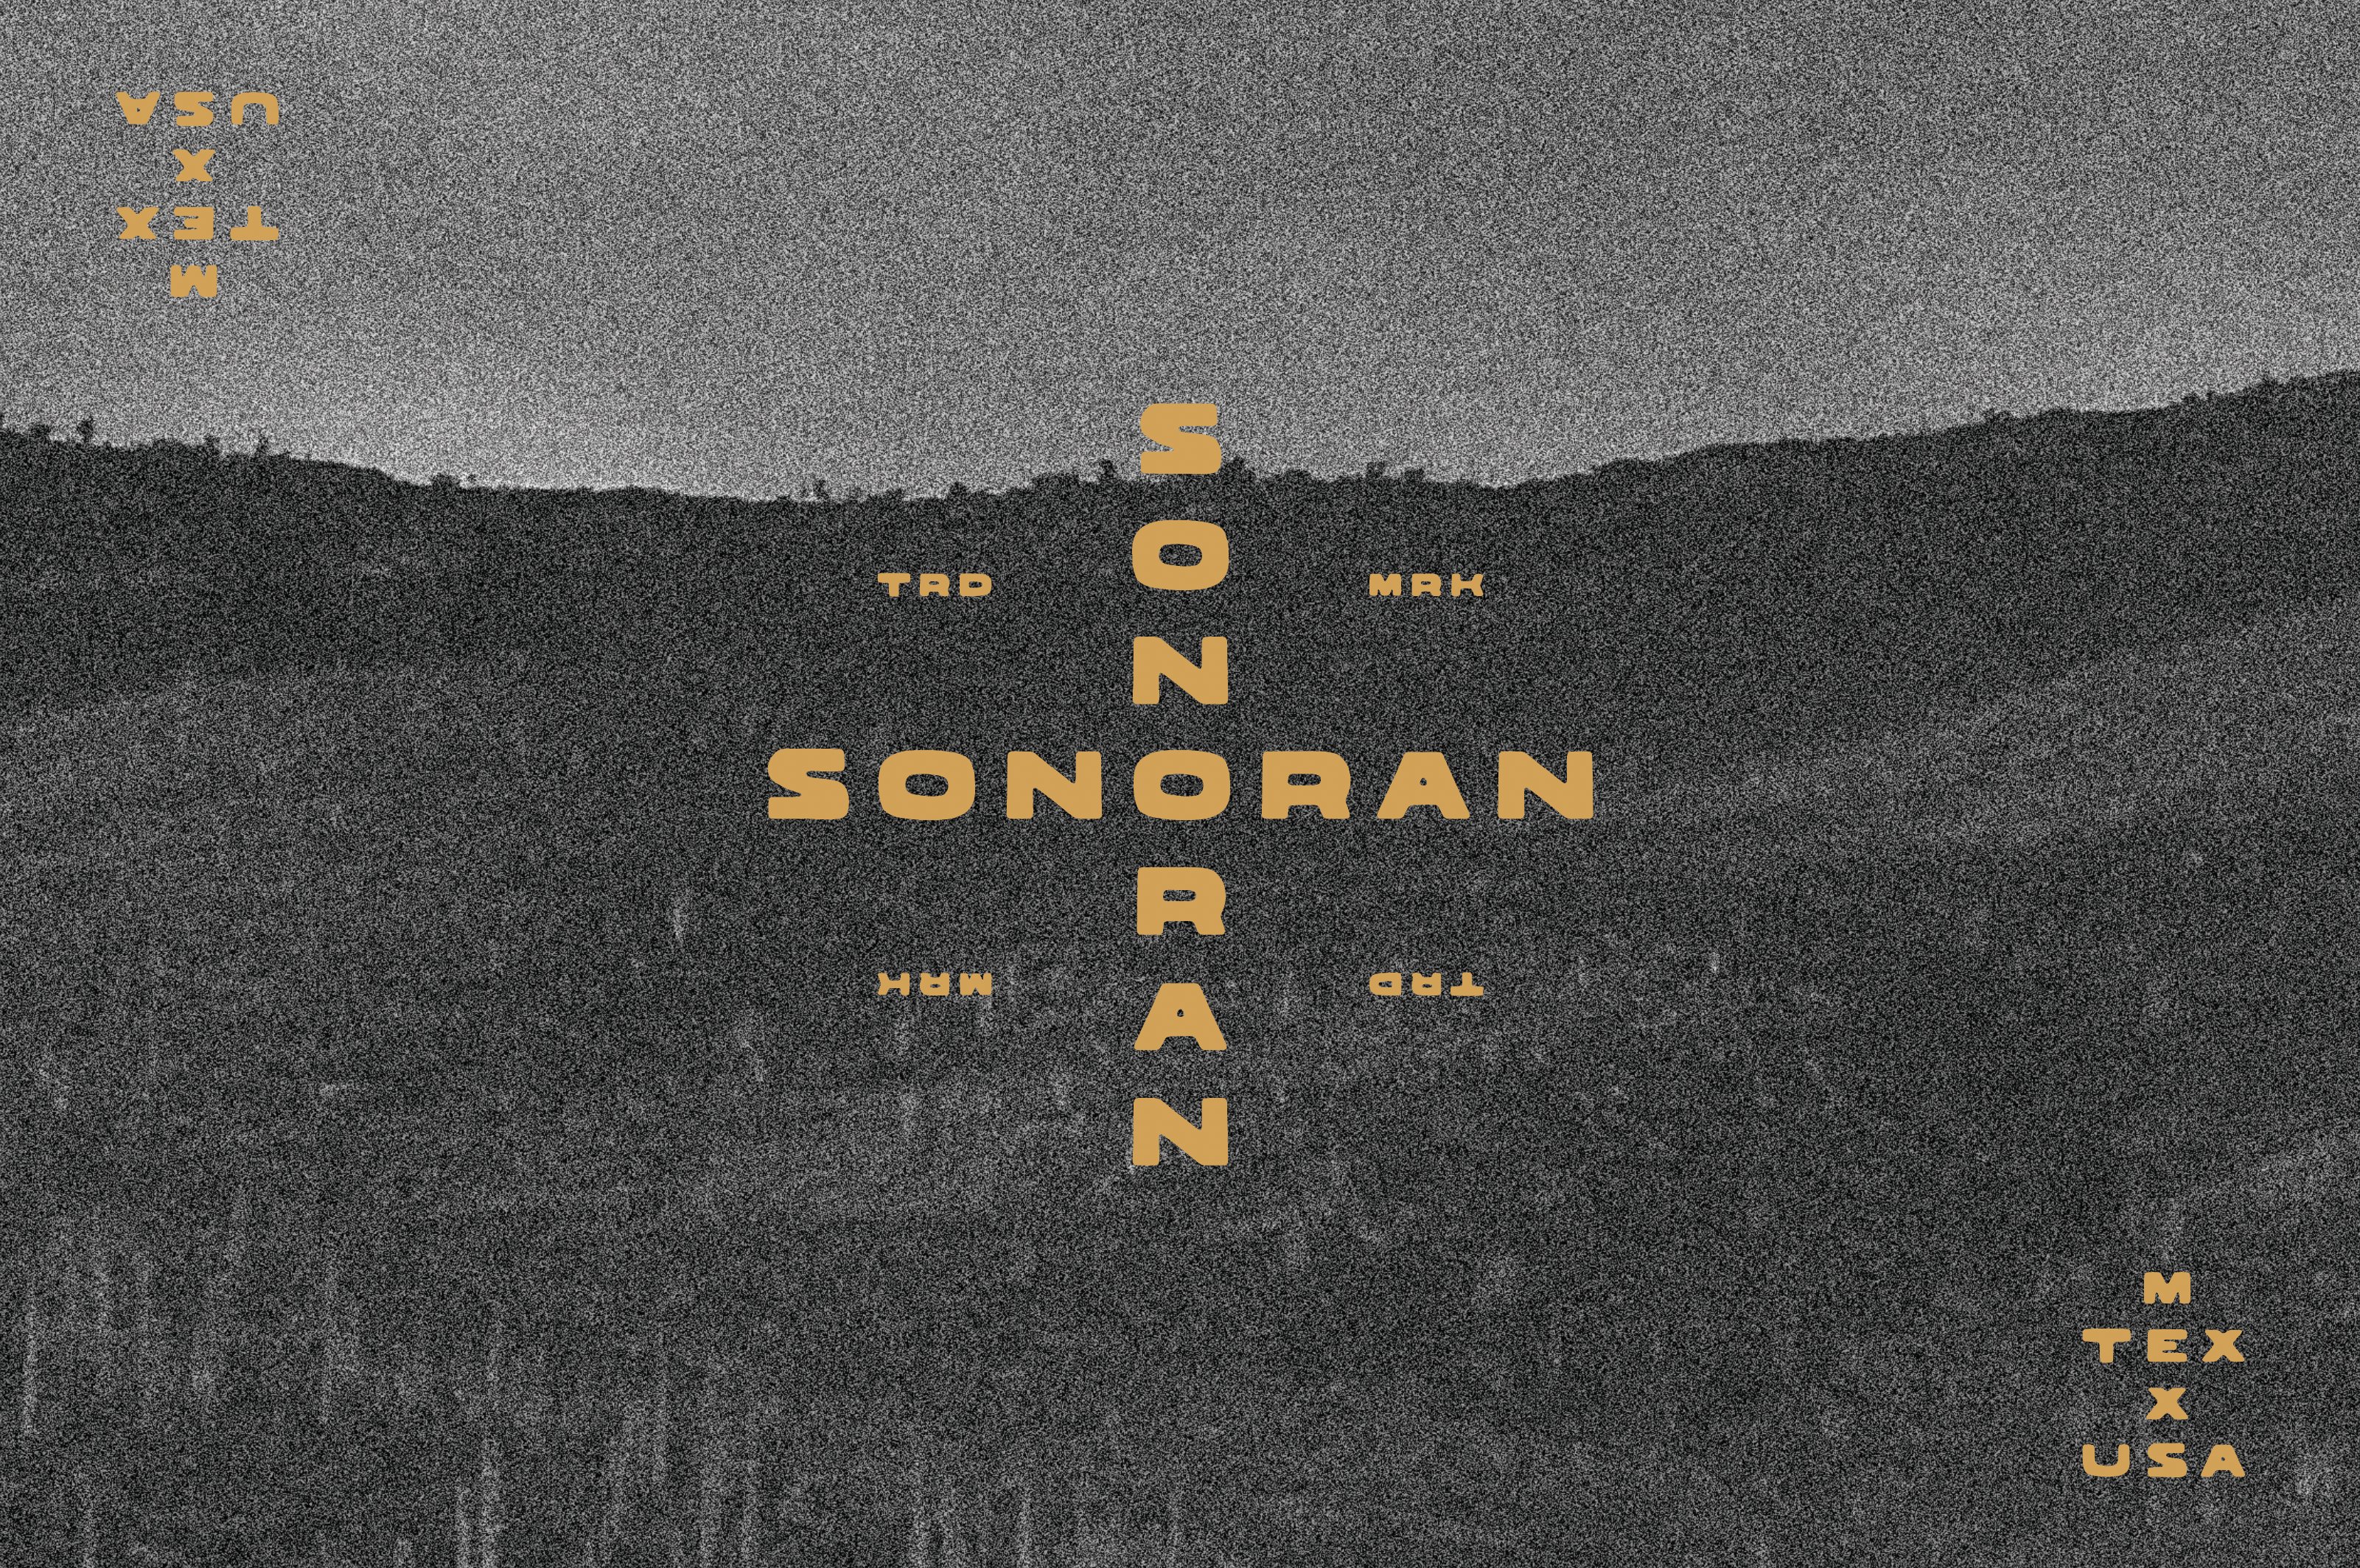 Sonoran Typeface cover image.